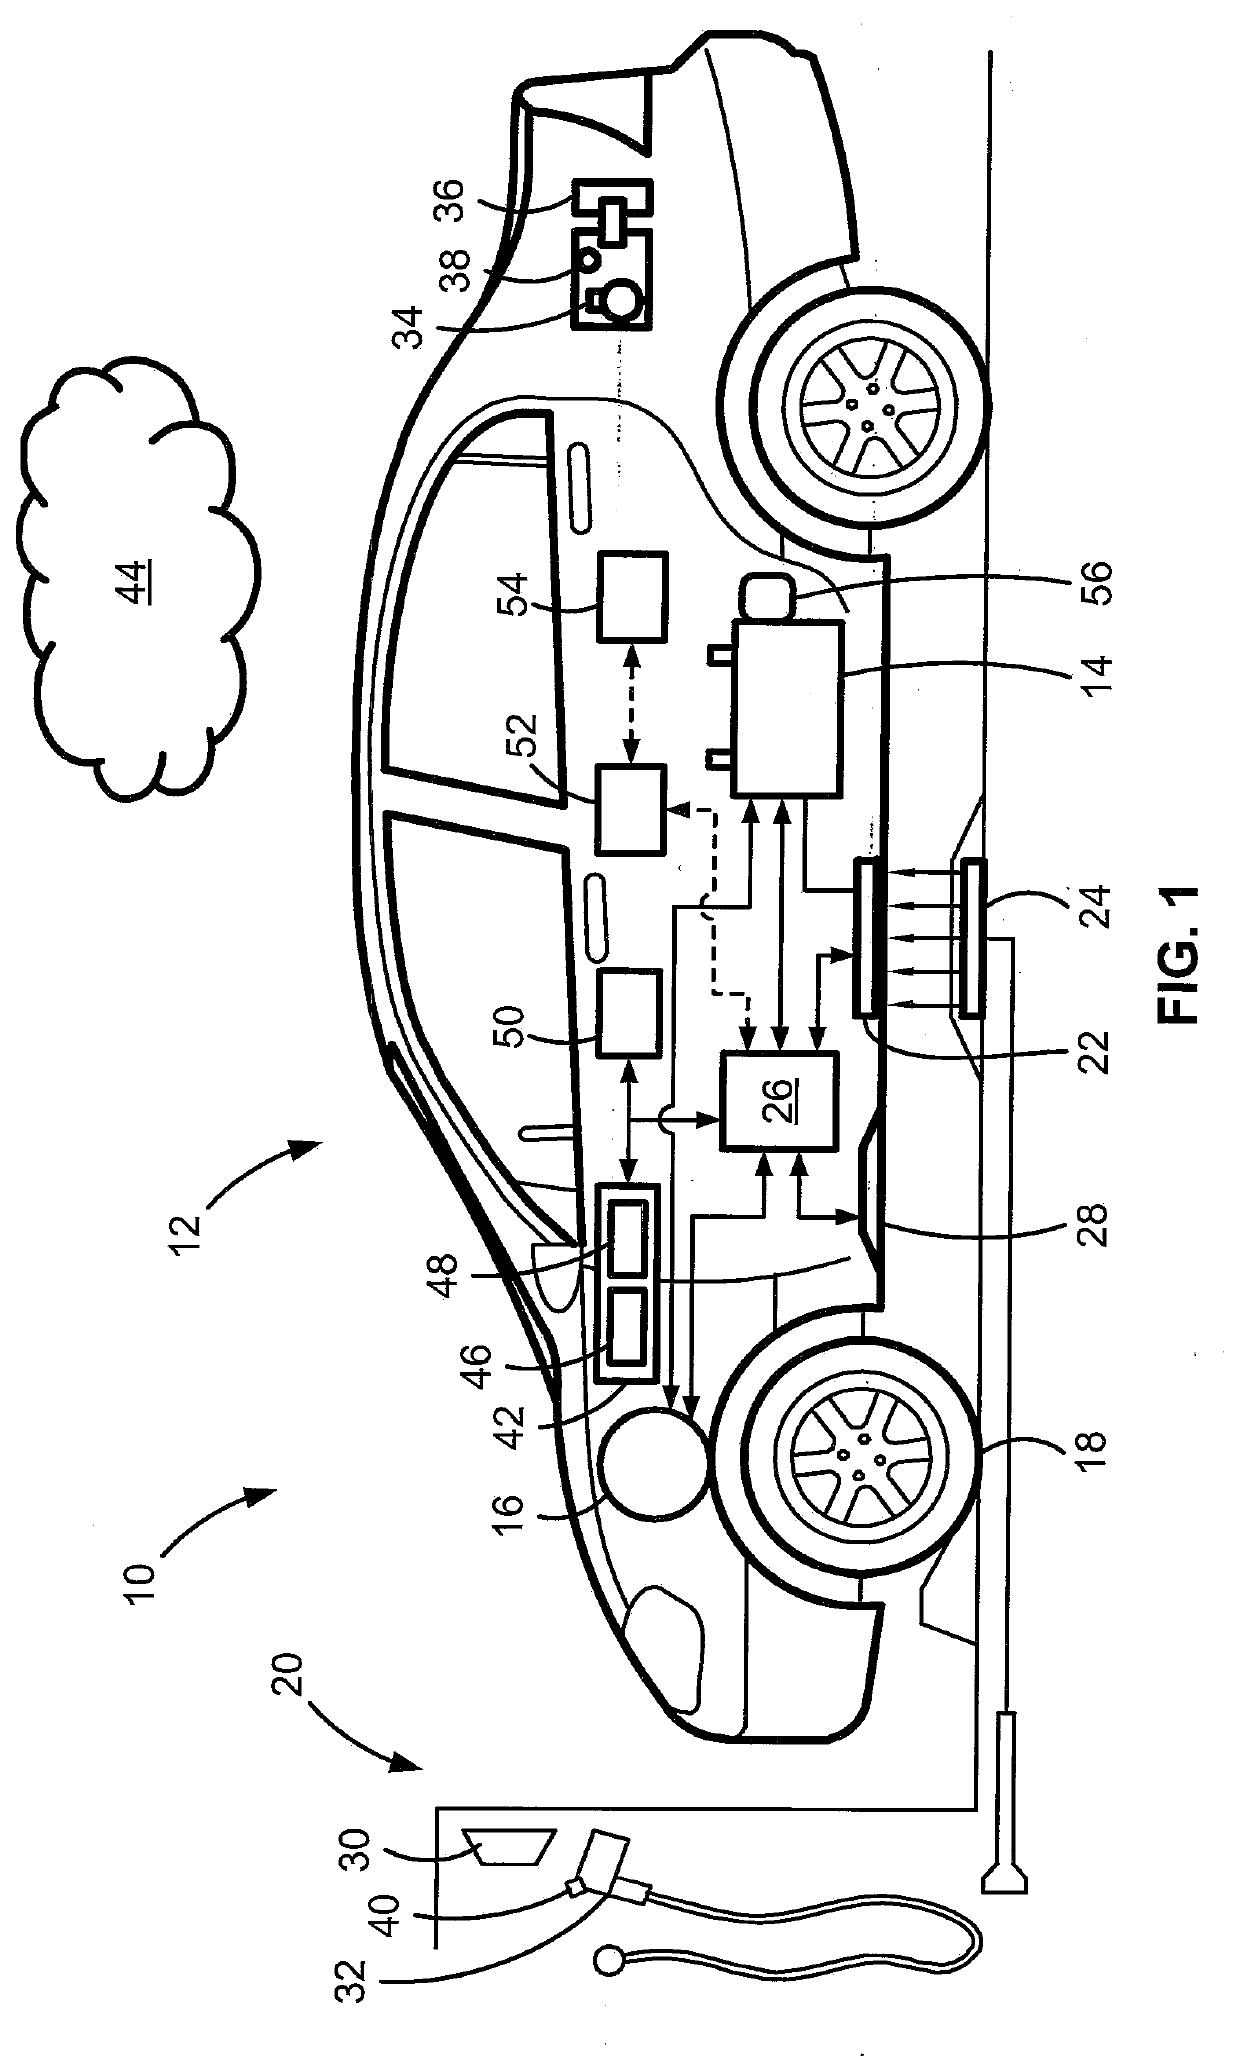 Electric-drive vehicles, powertrains, and logic for comprehensive vehicle control during towing